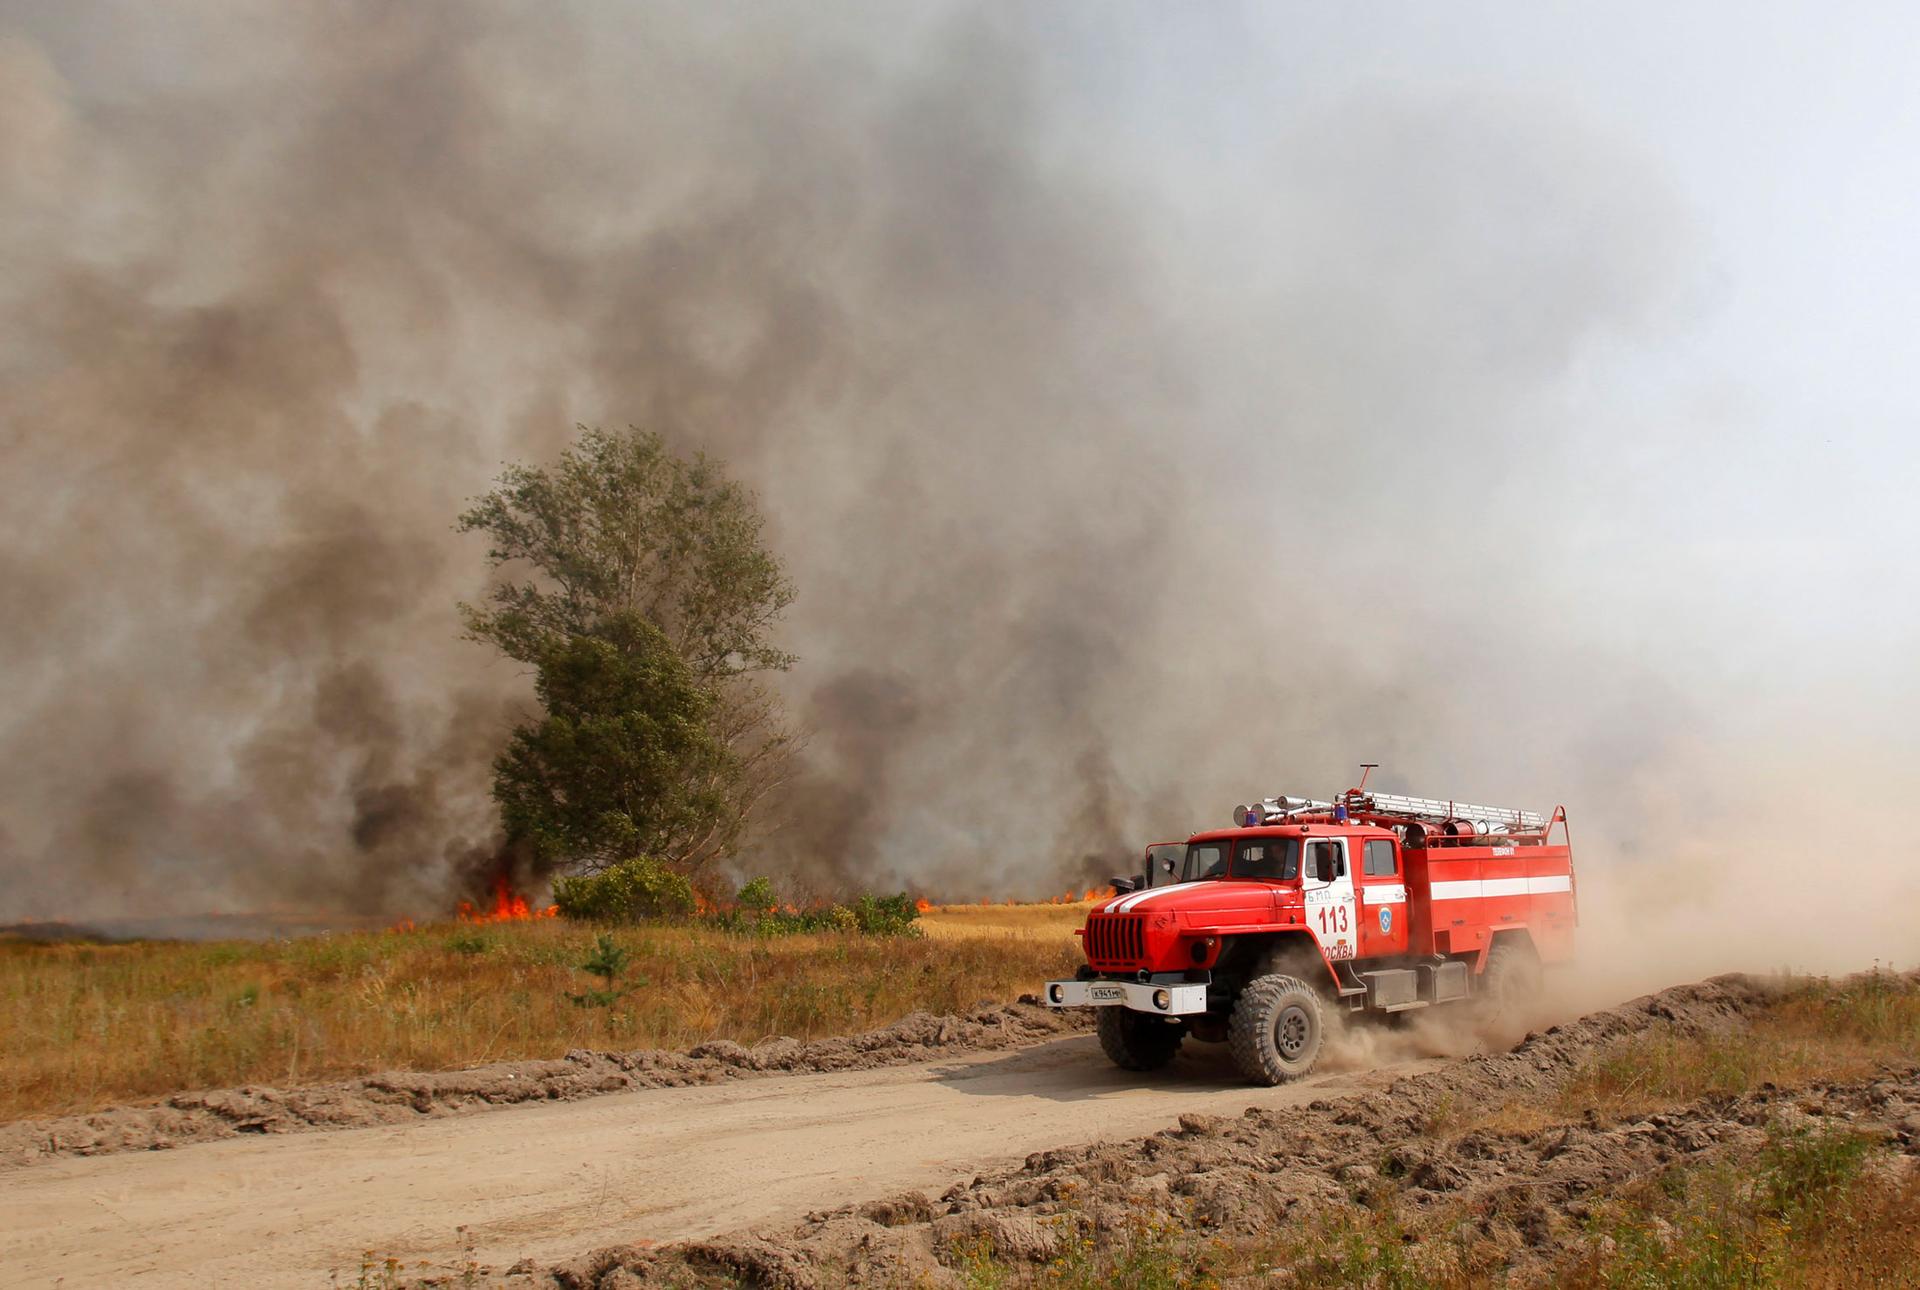 A red fire truck is shown driving across the frame with smoke and fire in the background.